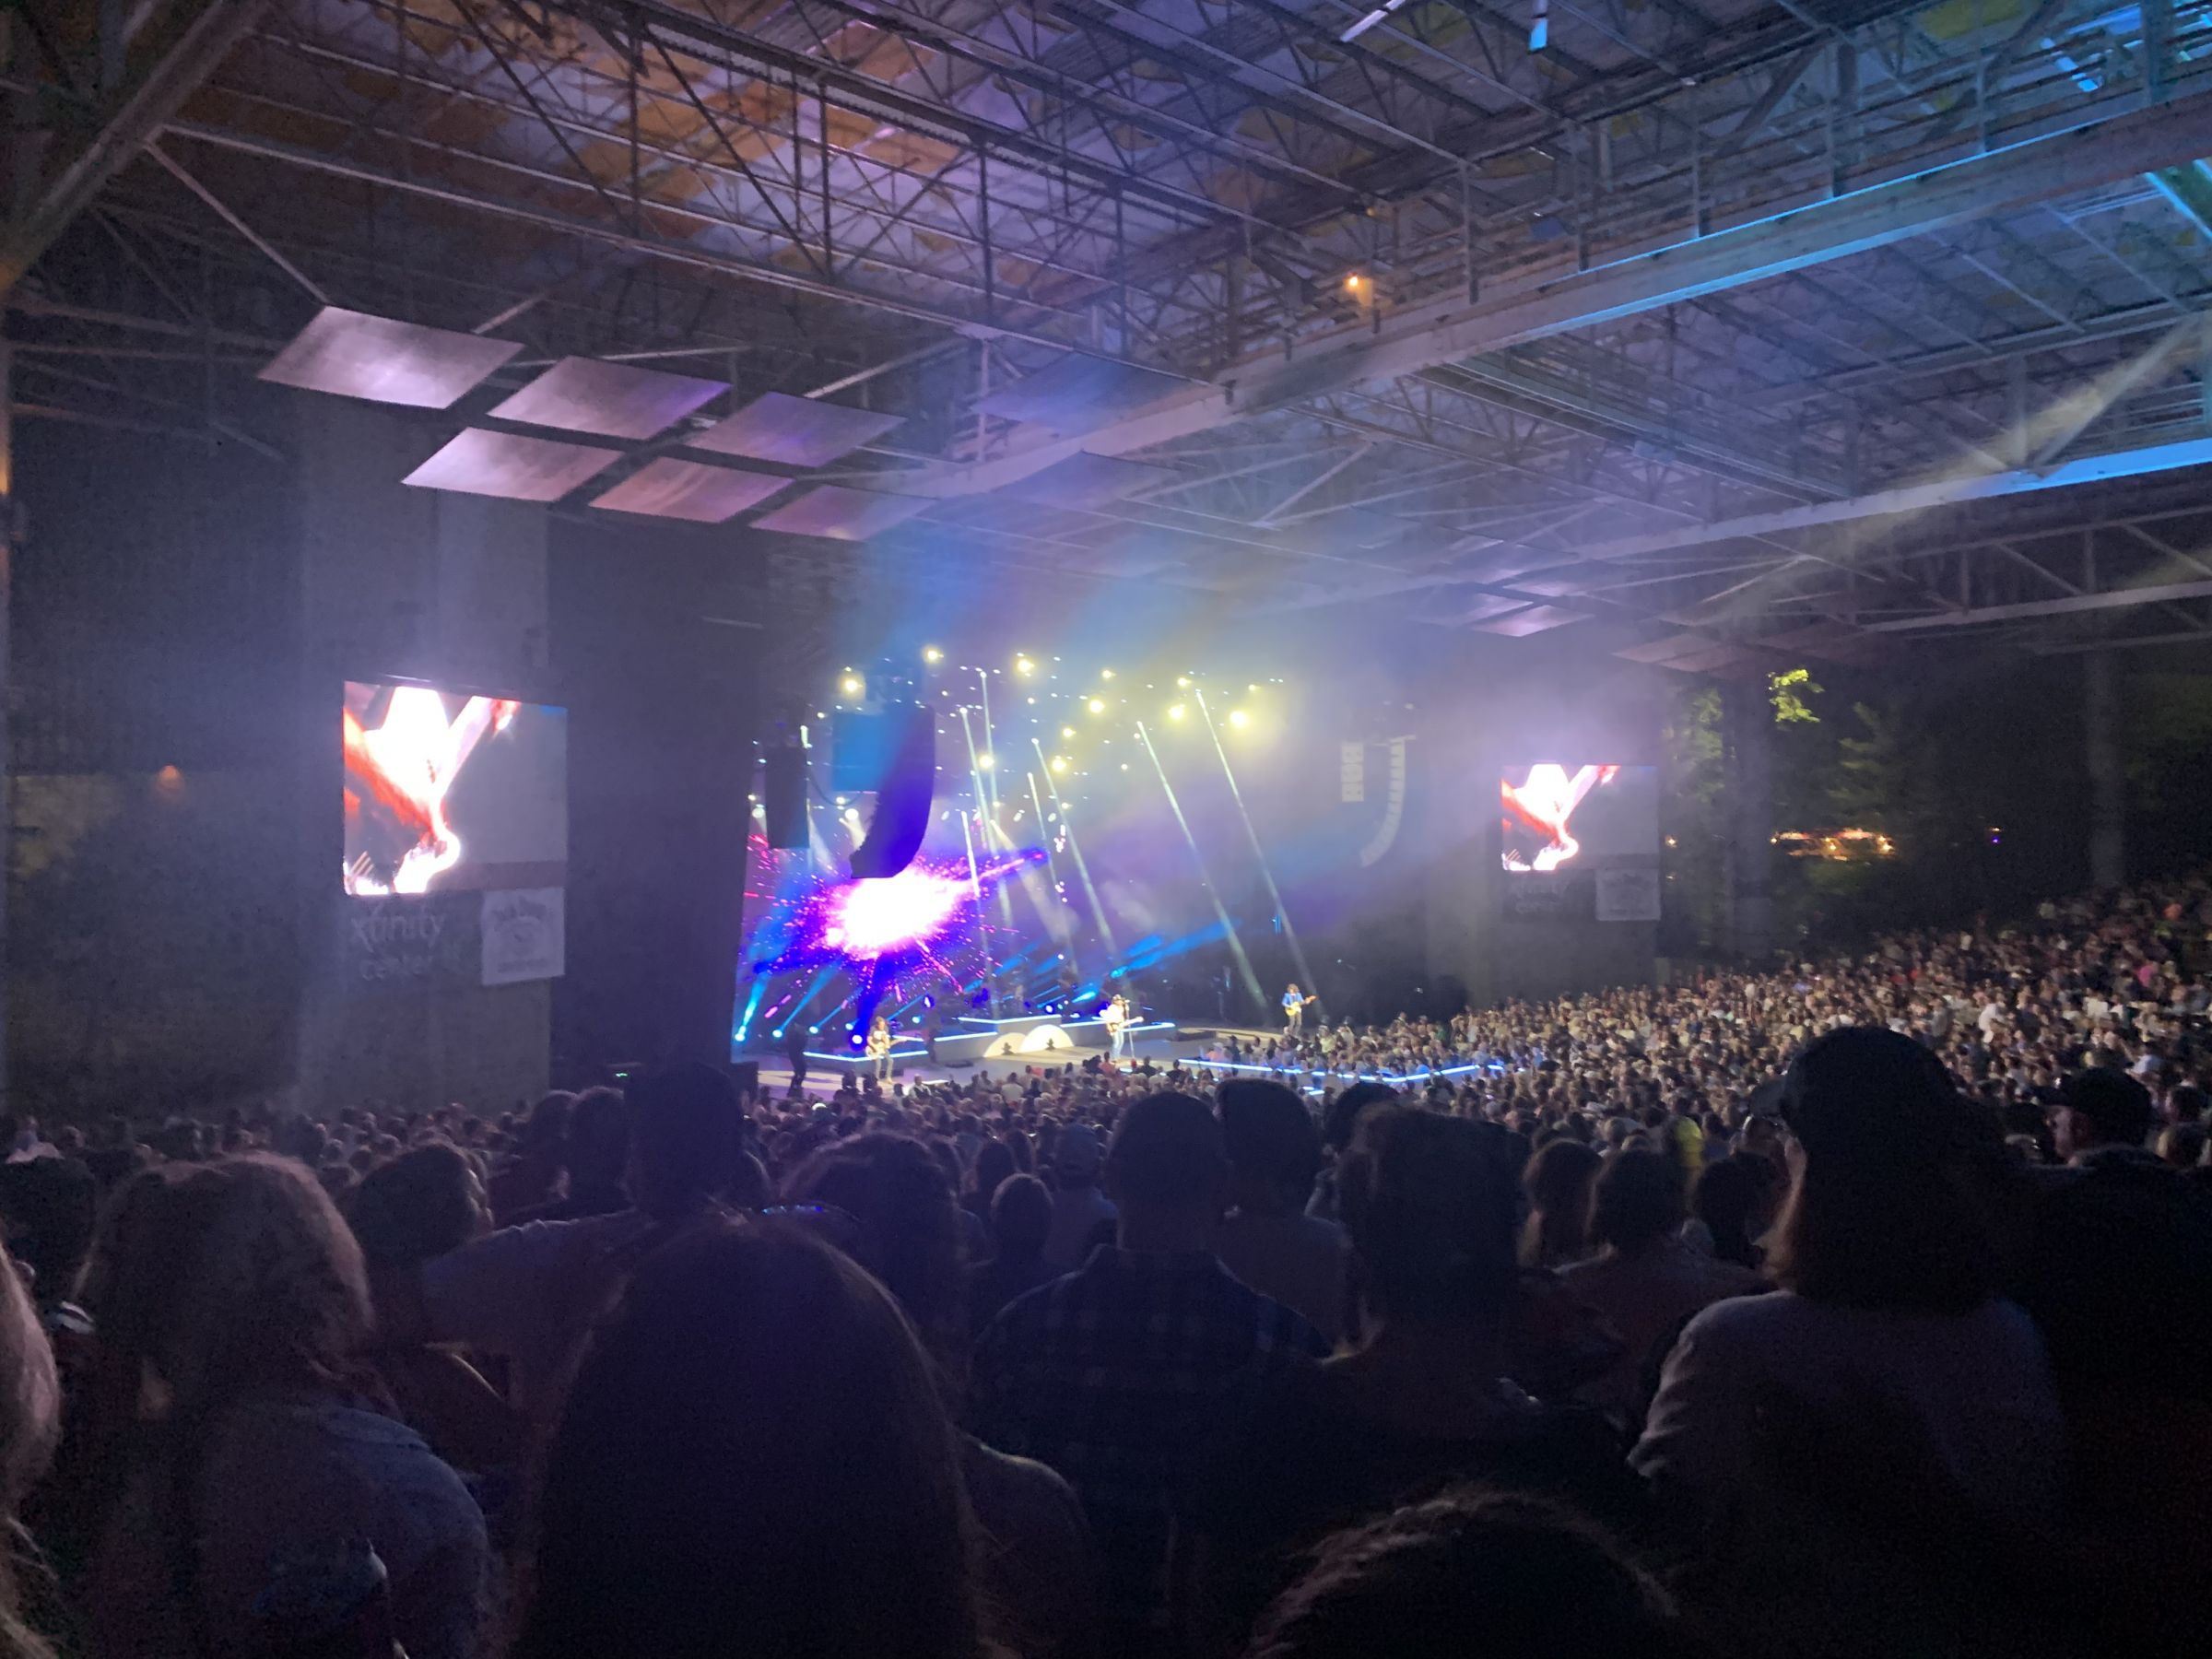 section 8, row p seat view  - xfinity center (mansfield)